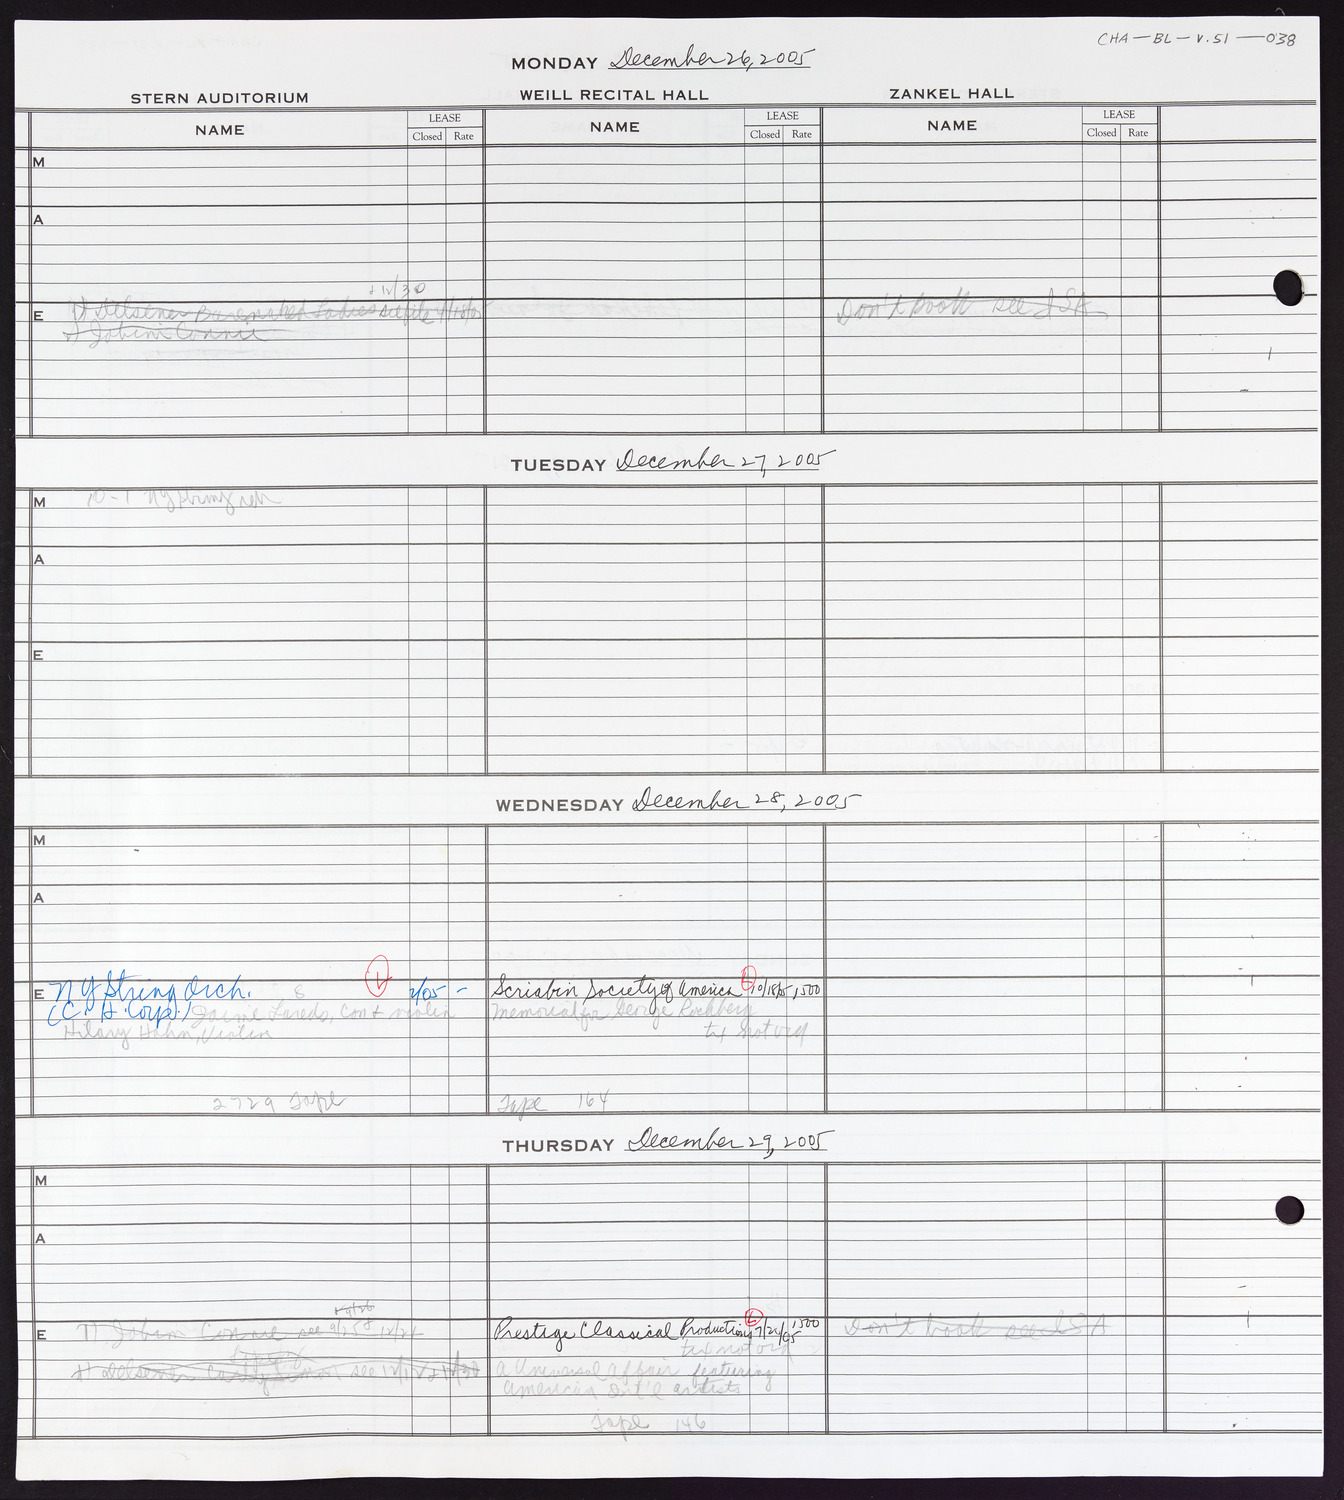 Carnegie Hall Booking Ledger, volume 51, page 38